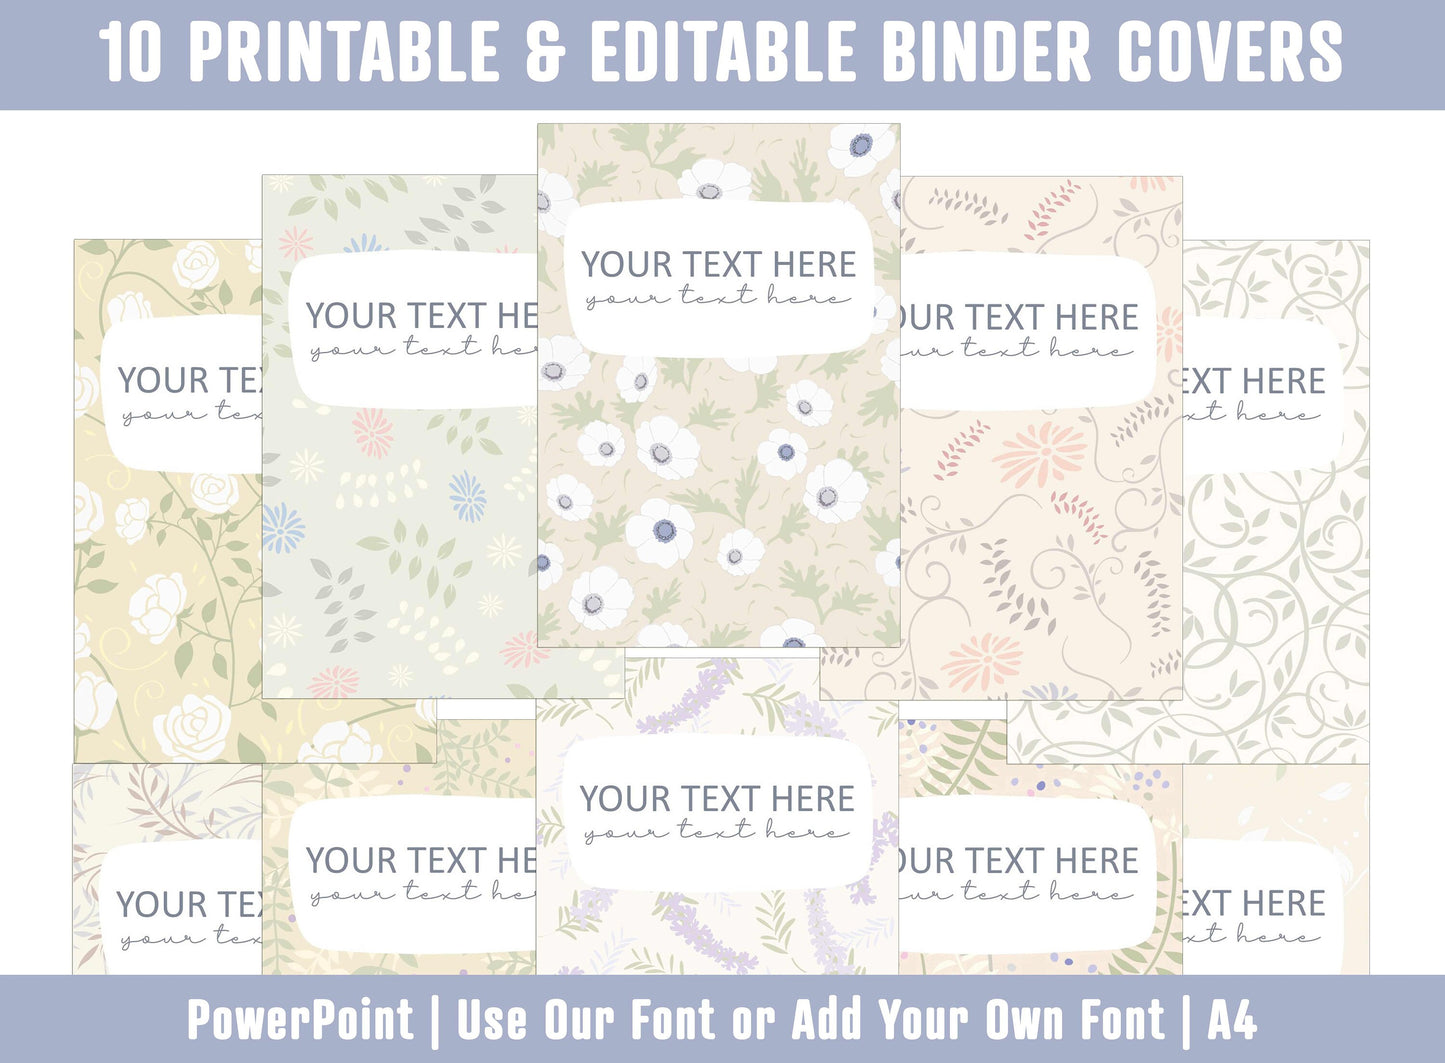 PowerPoint Binder Covers, 10 Printable/Editable Floral Pattern Covers+Spines, Binder/Planner Inserts for Teacher, Student, Home School